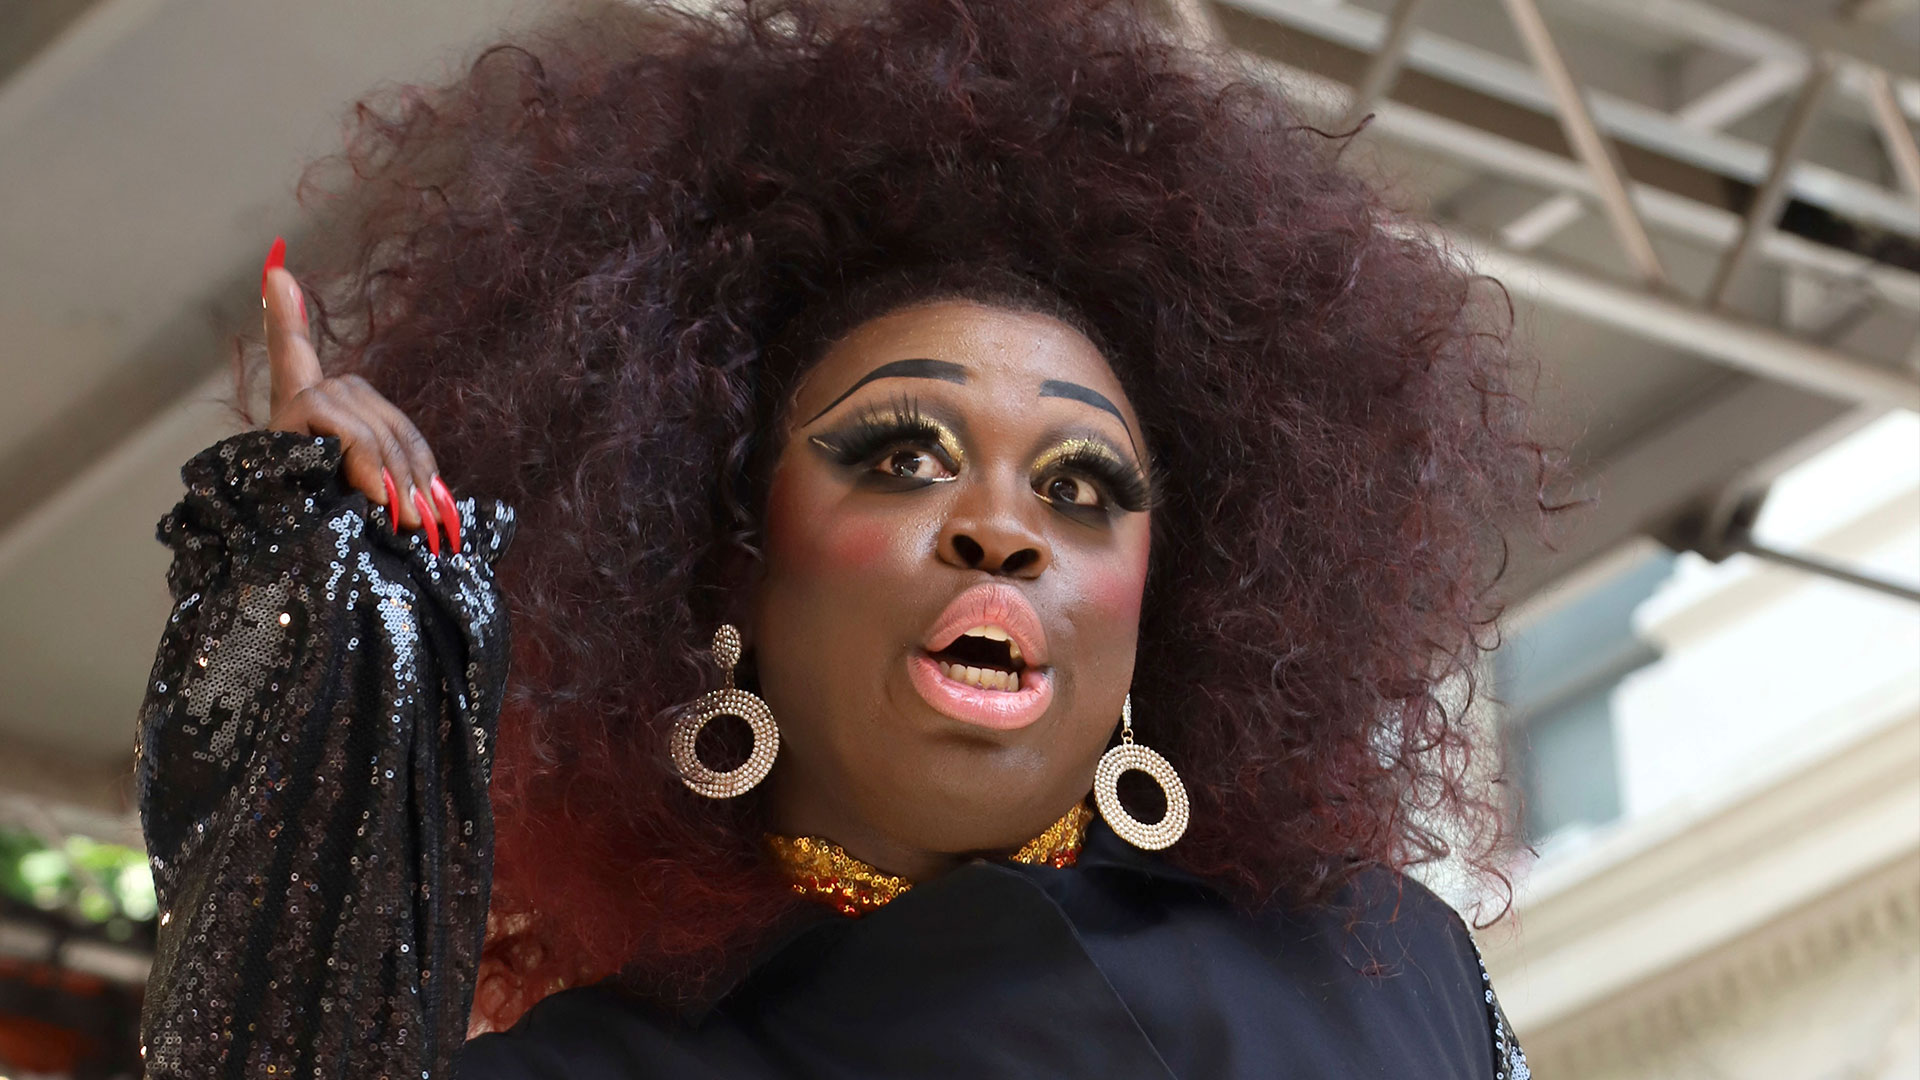 'Drag Queen Story Hour' Floods UK with 70 Events, Parents Push Back Calling It a Form of Child 'Abuse'